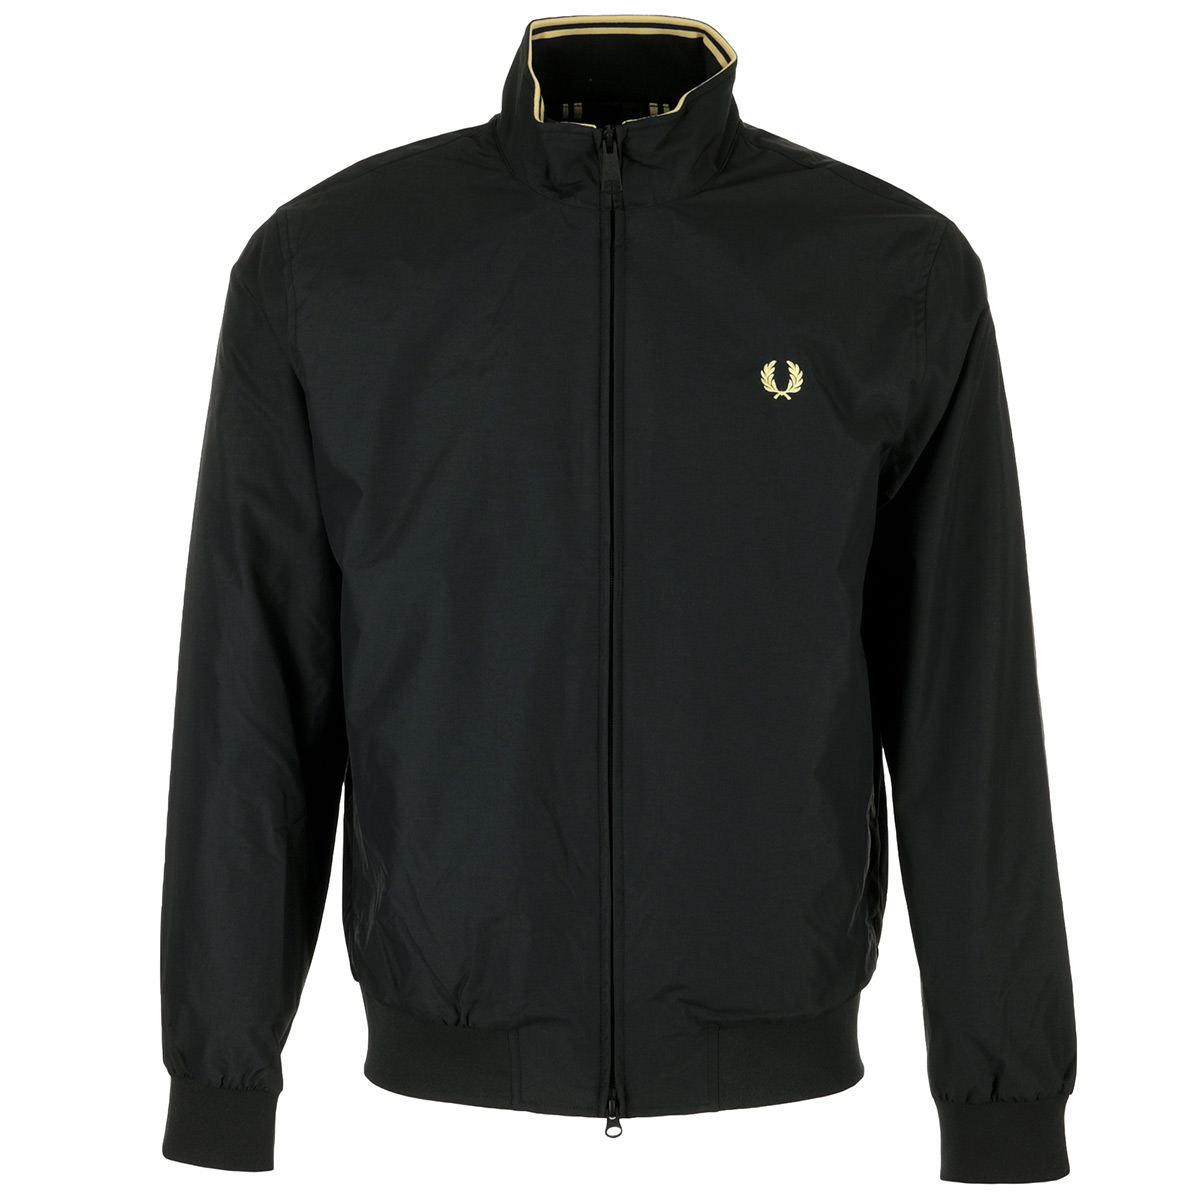 Fred Perry "Brentham Jacket"